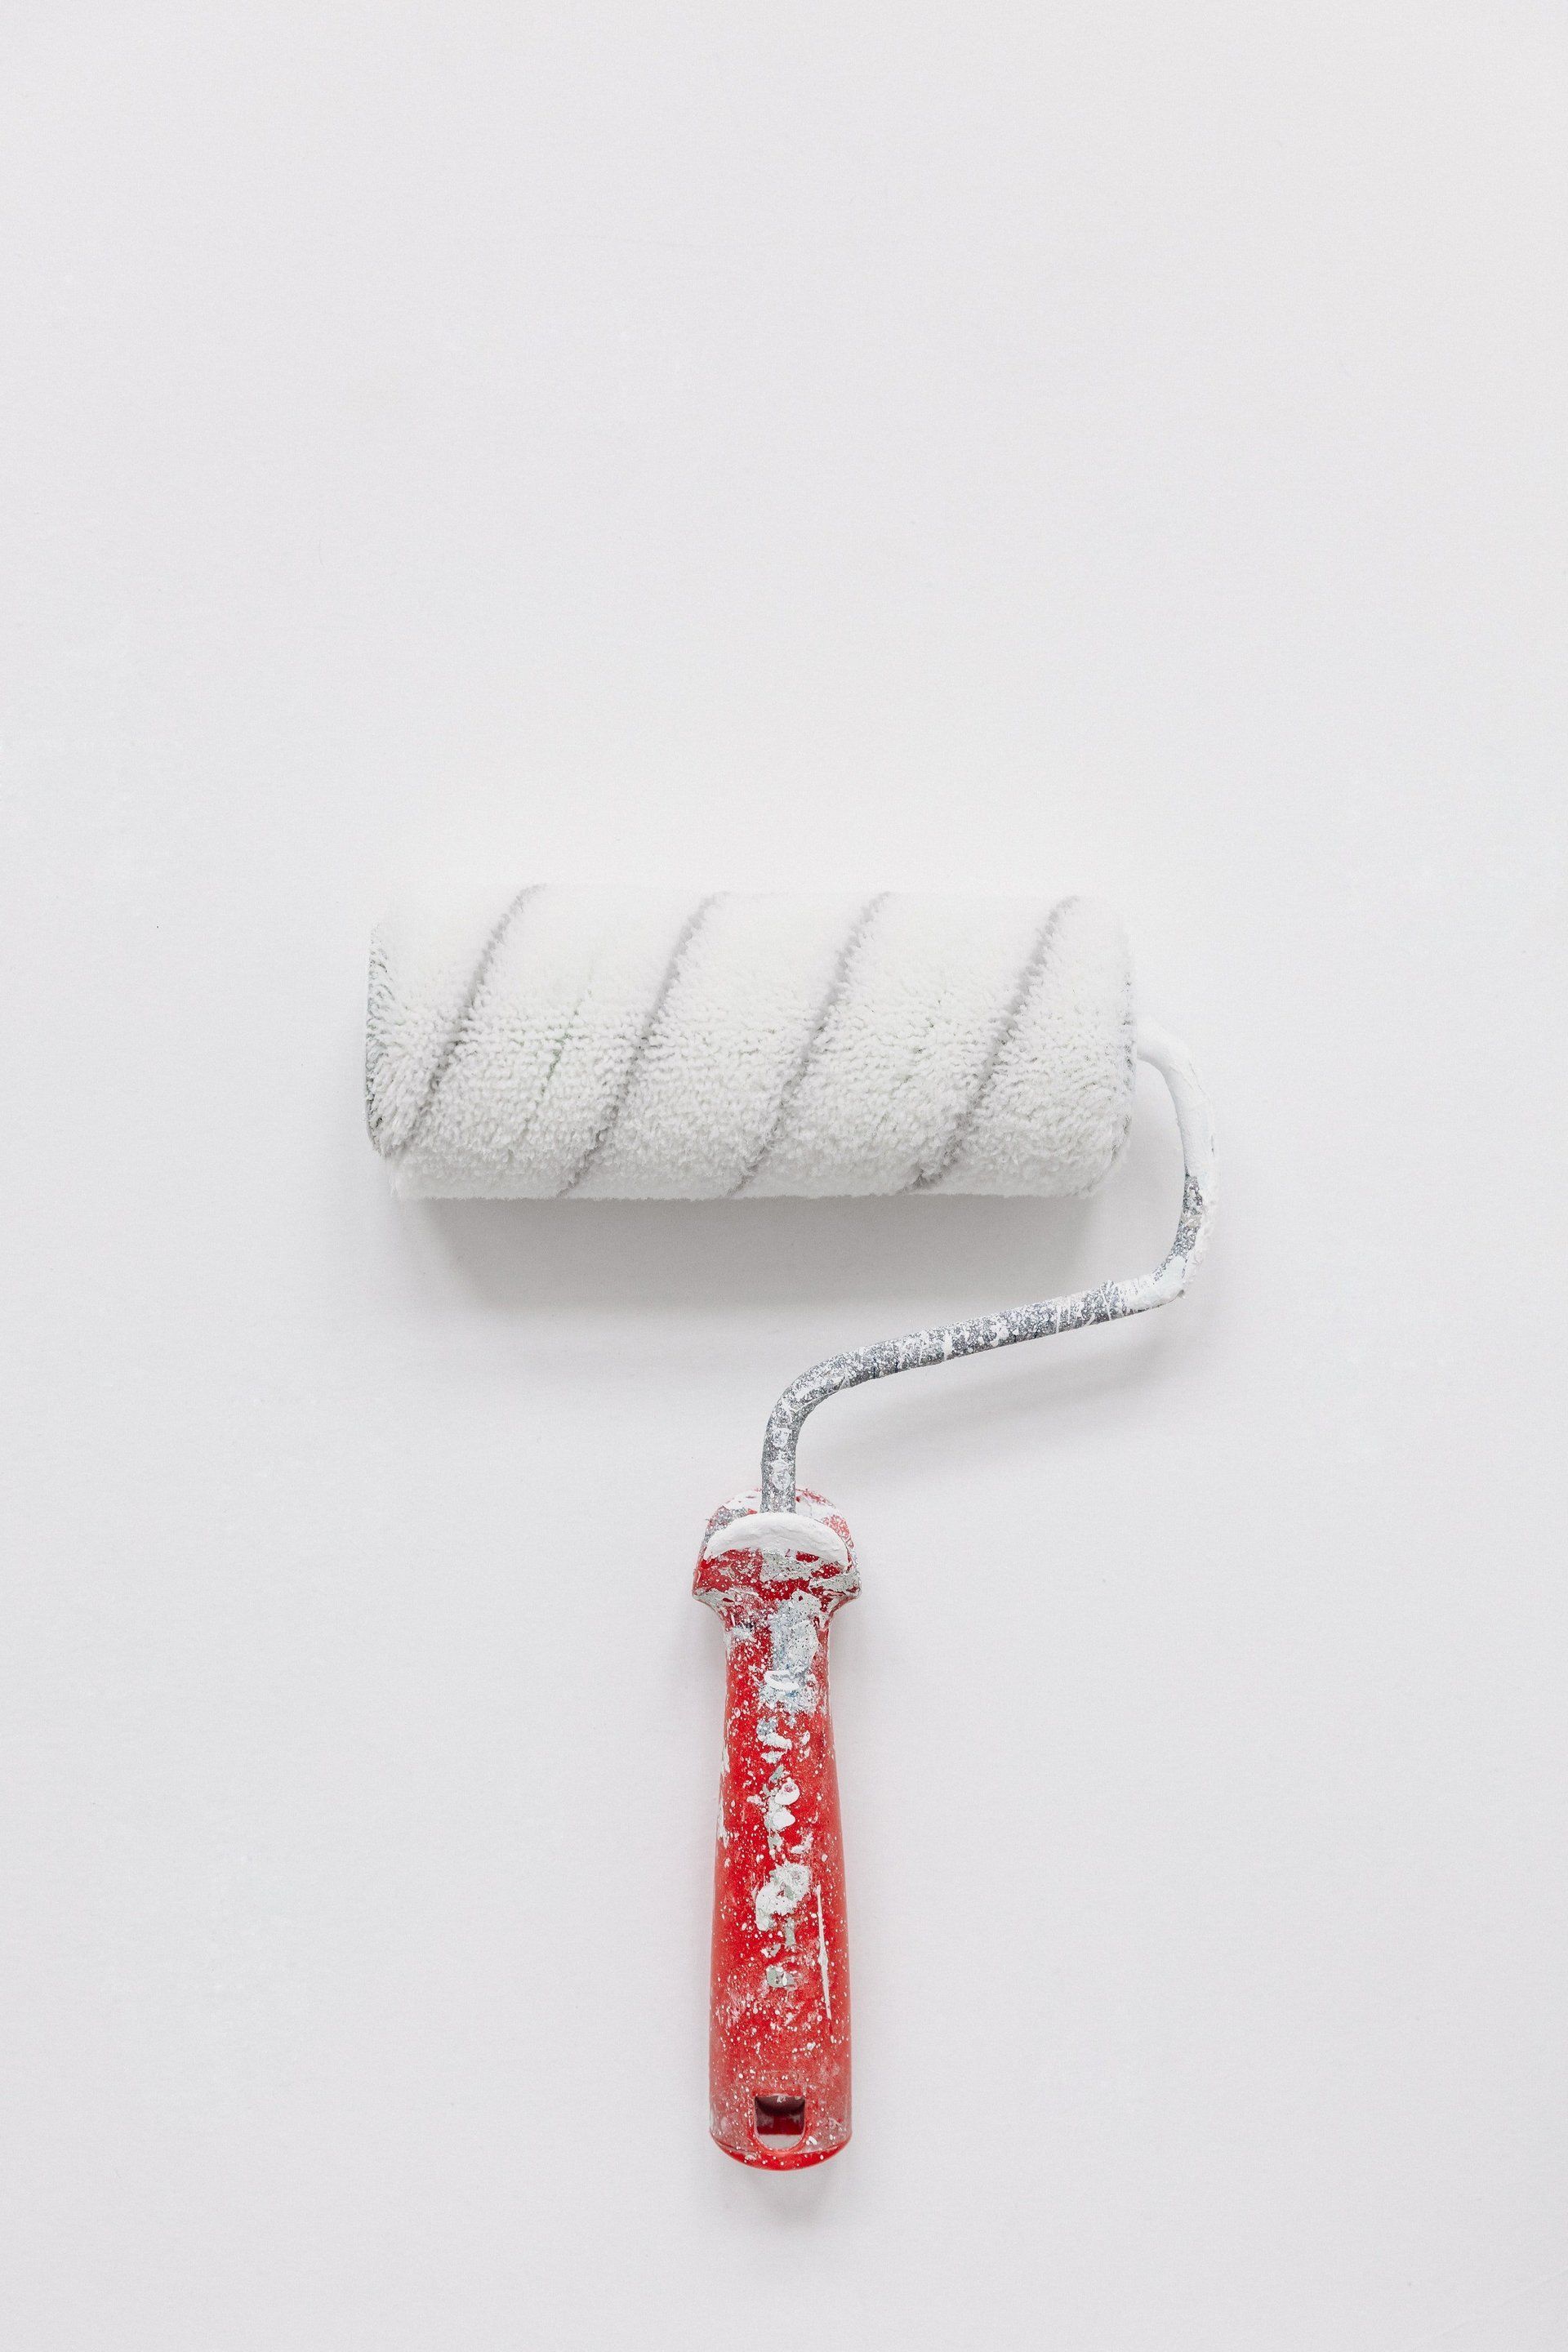 small paint roller with white paint and red handle